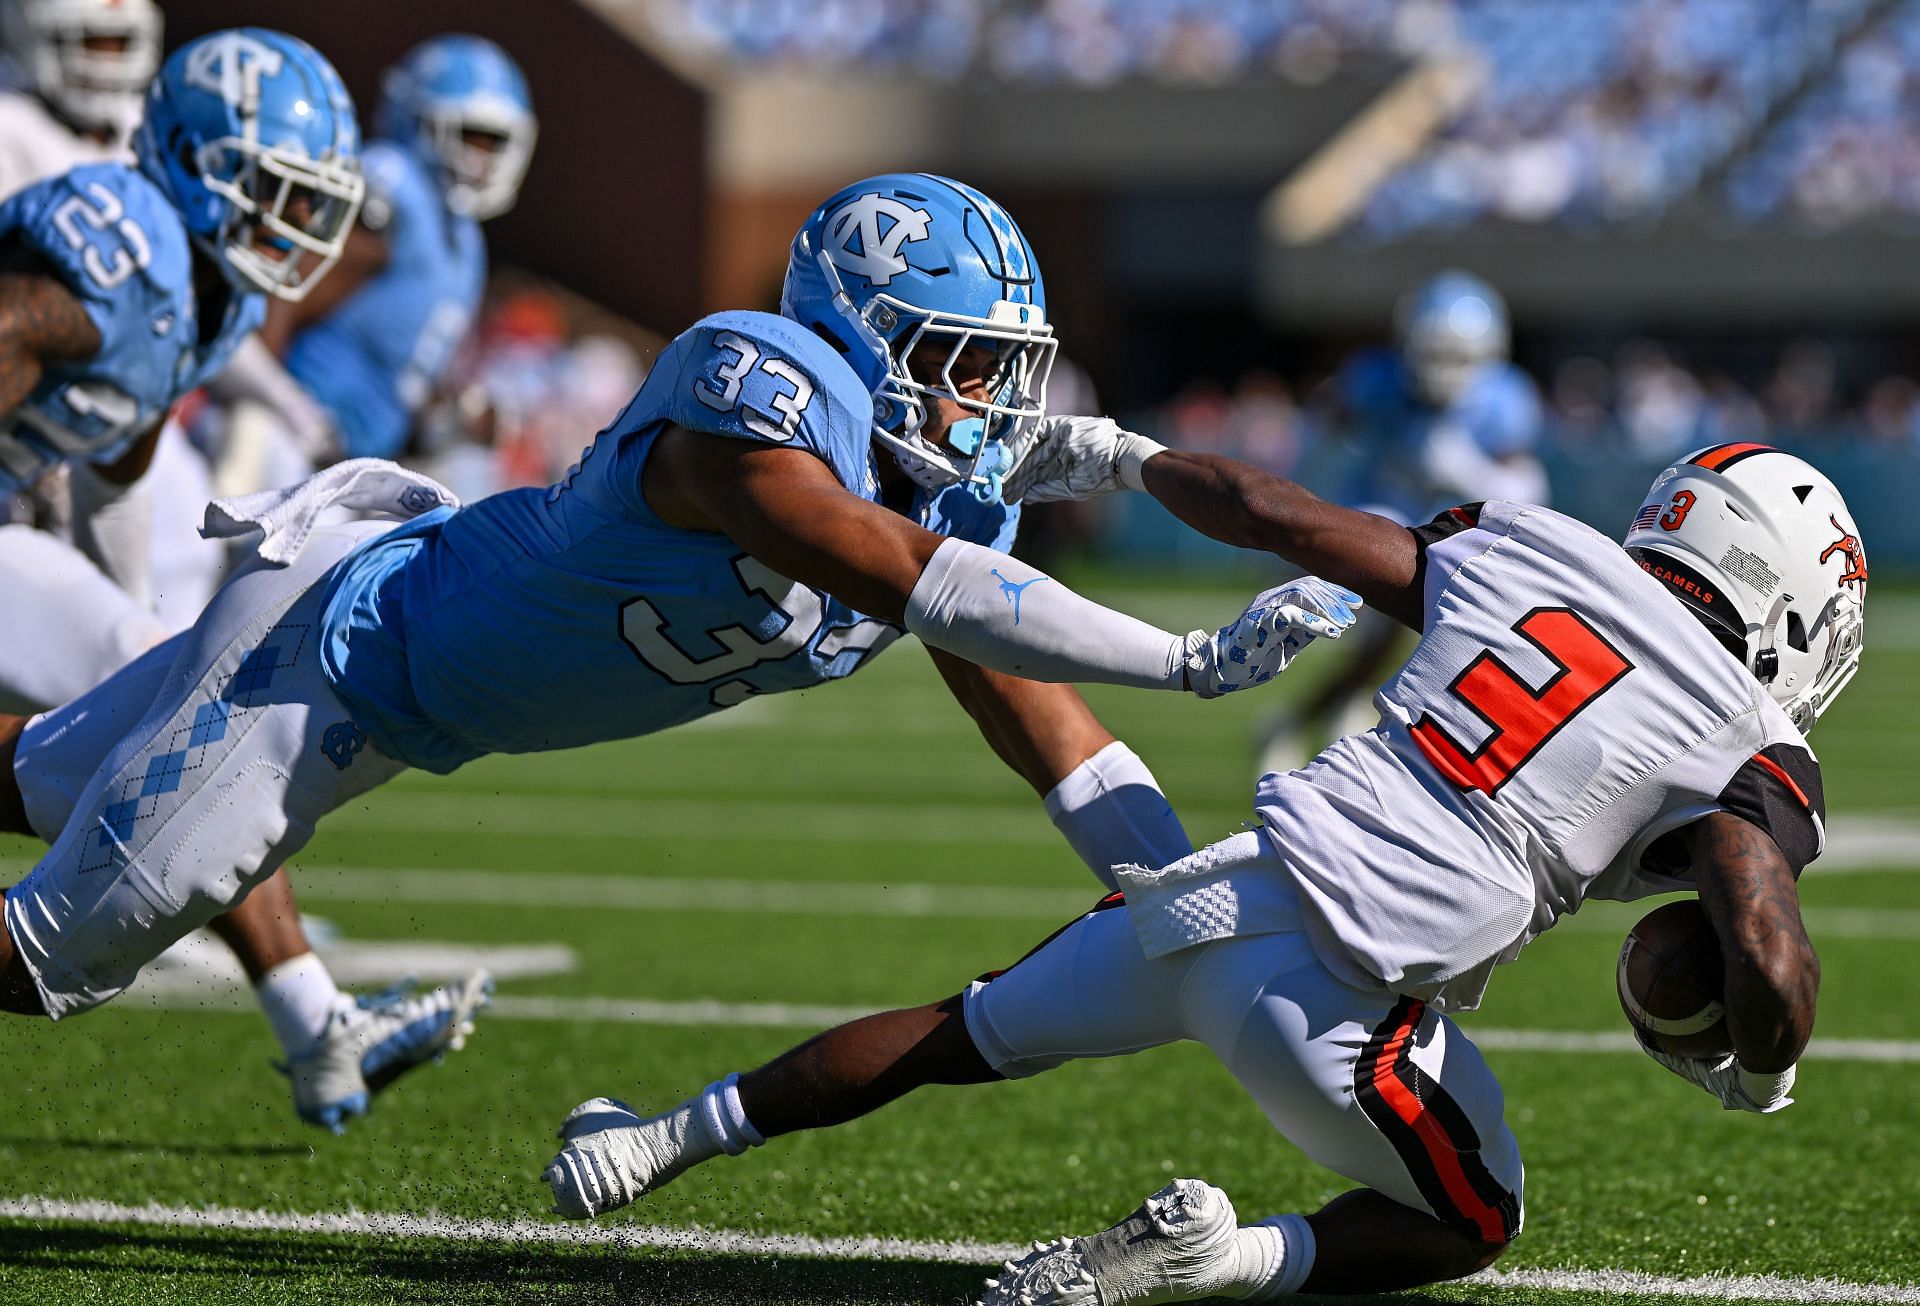 Cedric Gray #33 of the North Carolina Tar Heels tackles Tai Goode #3 of the Campbell Fighting Camels